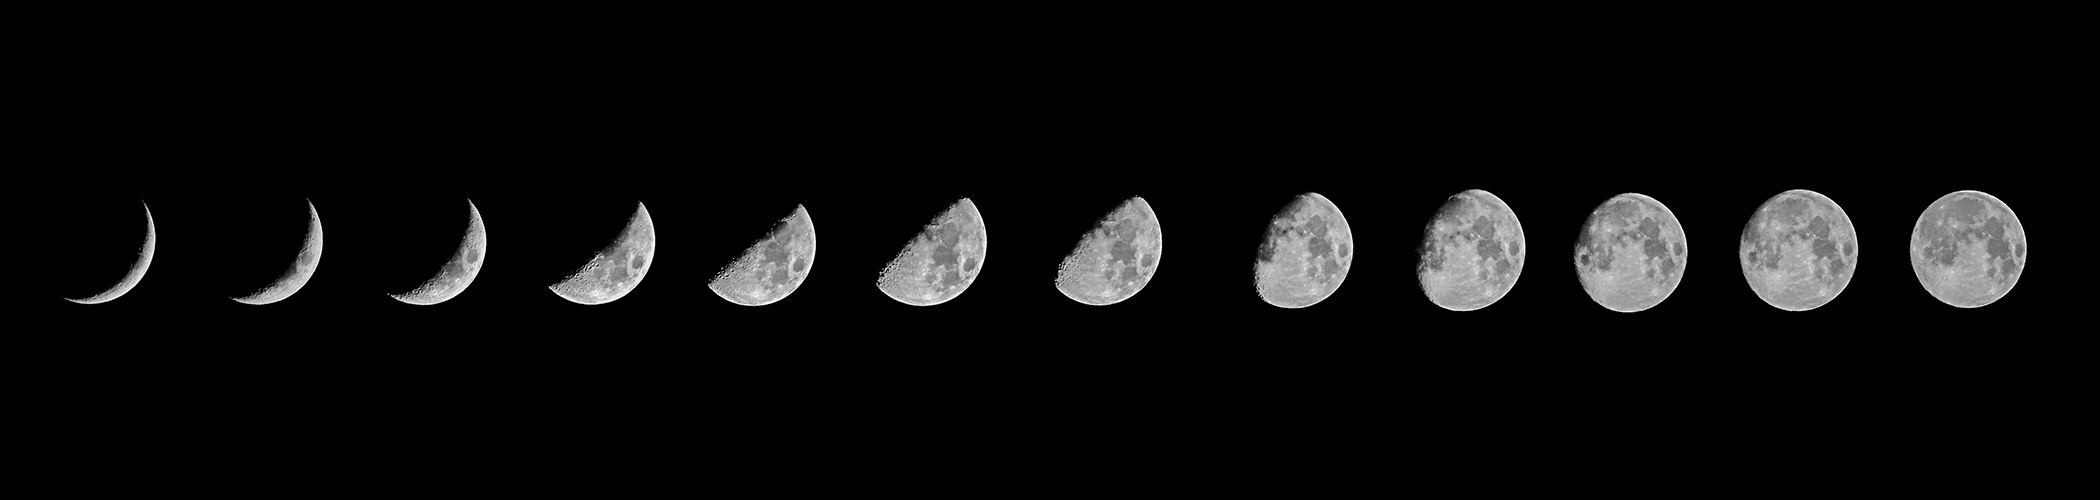 Phases lunaires